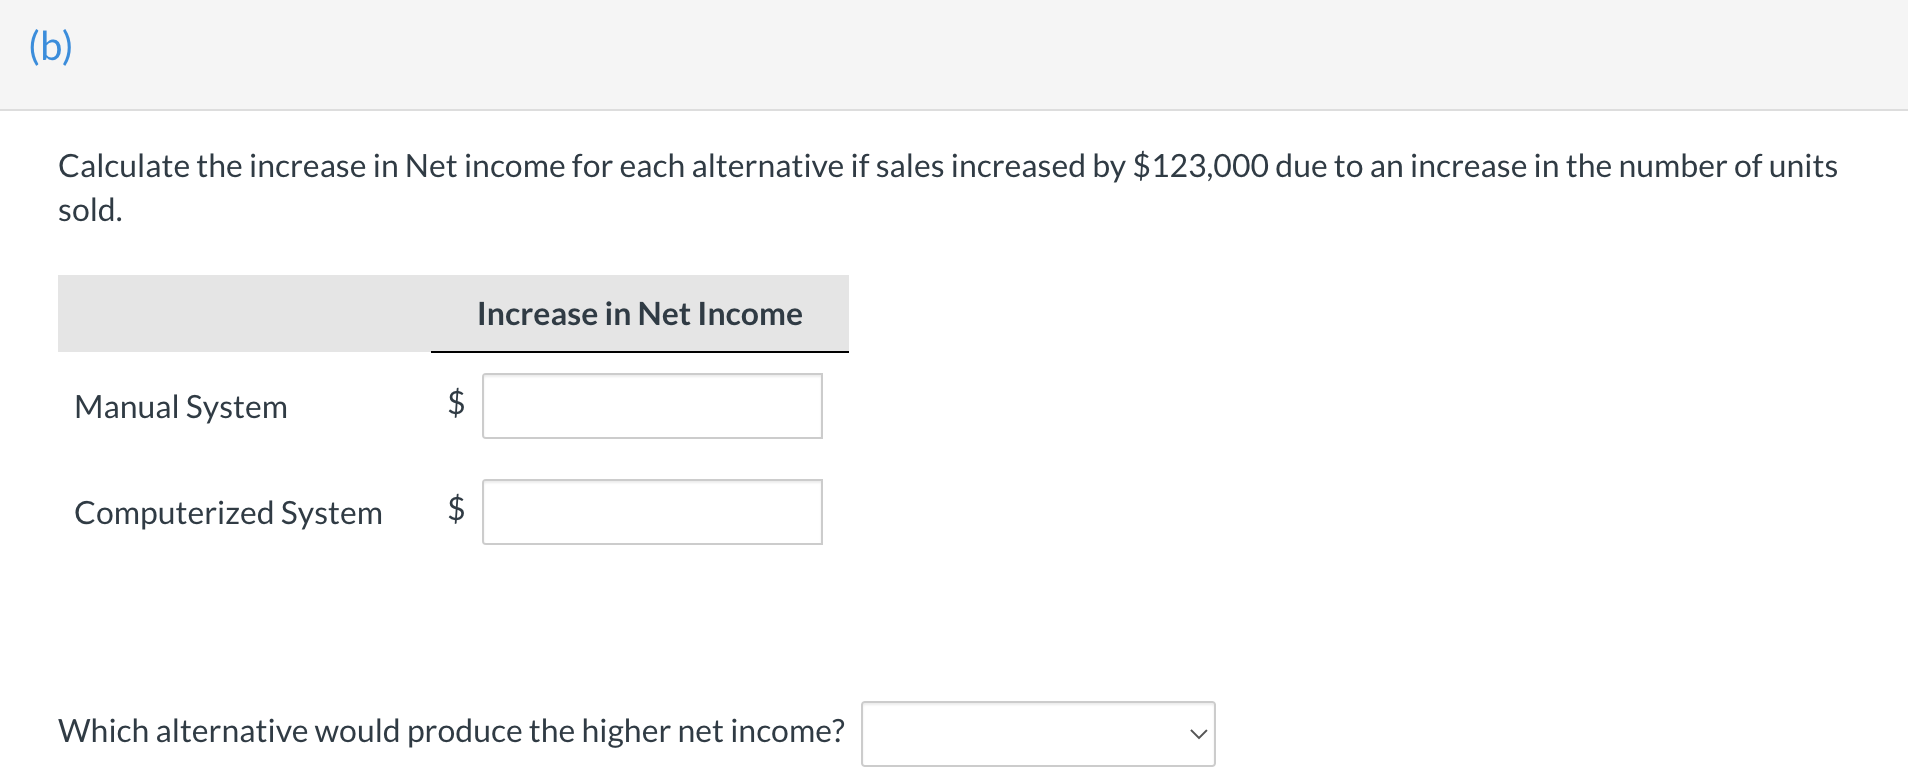 (b)Calculate the increase in Net income for each alternative if sales increased by $123,000 due to an increase in the number